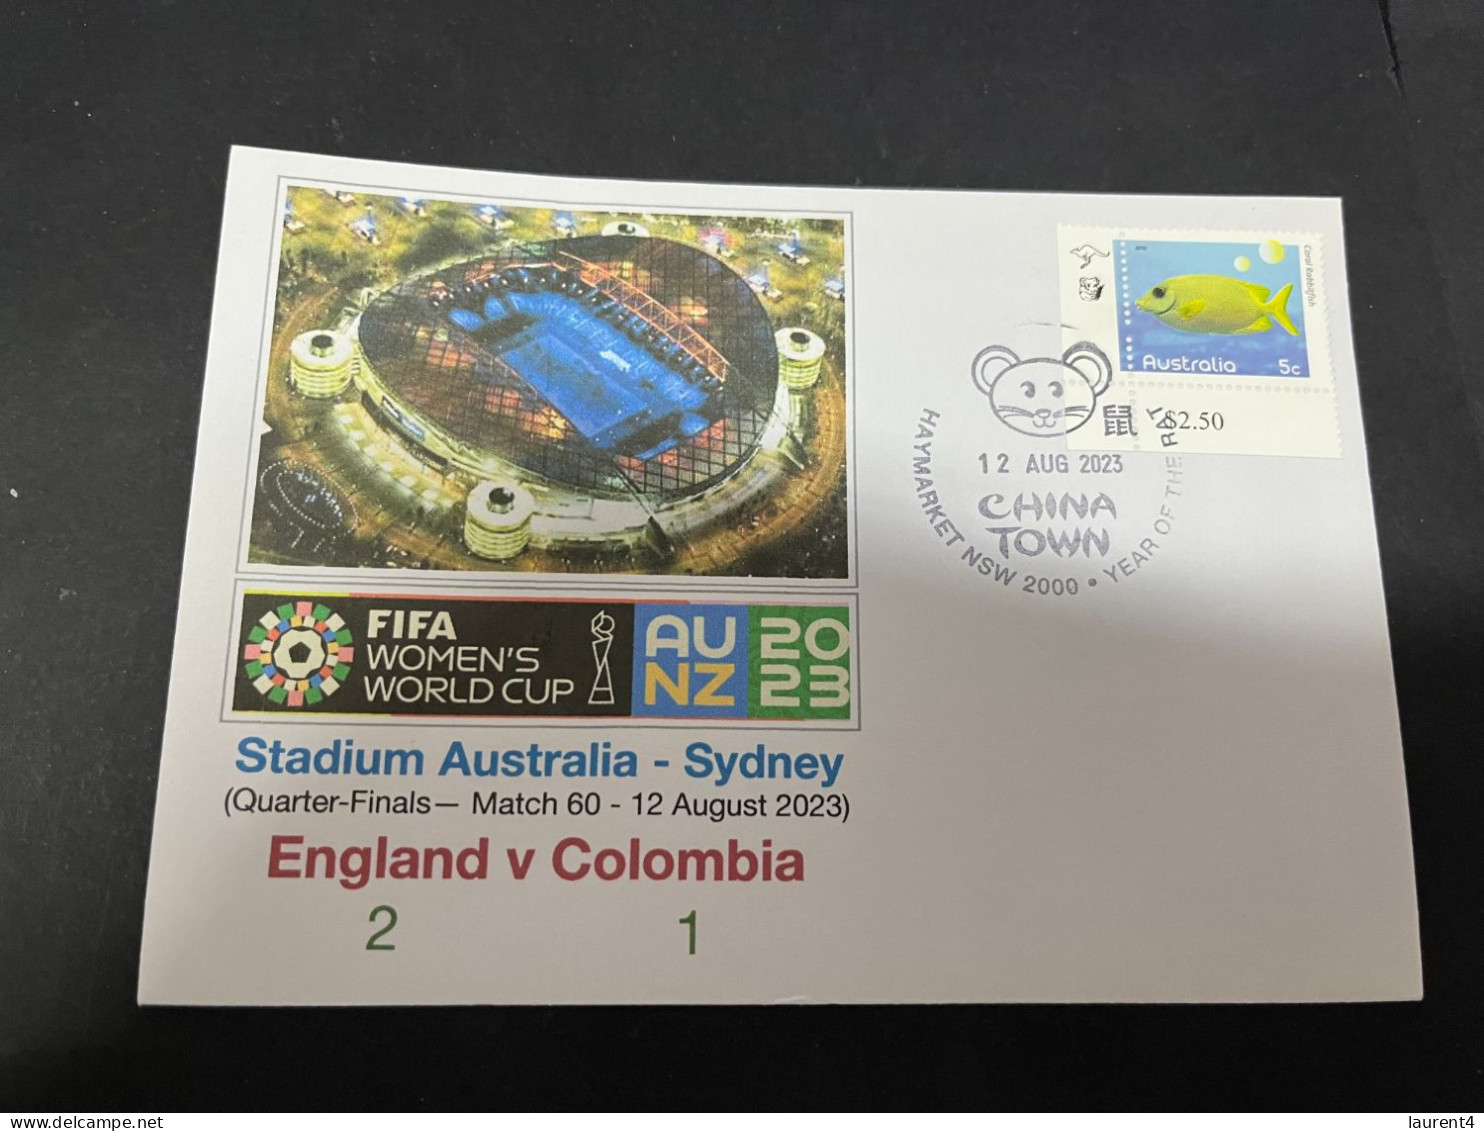 18-2-2024 (4 X 34)  6 covers - FIFA Women's Football World Cup 2023 - England matches